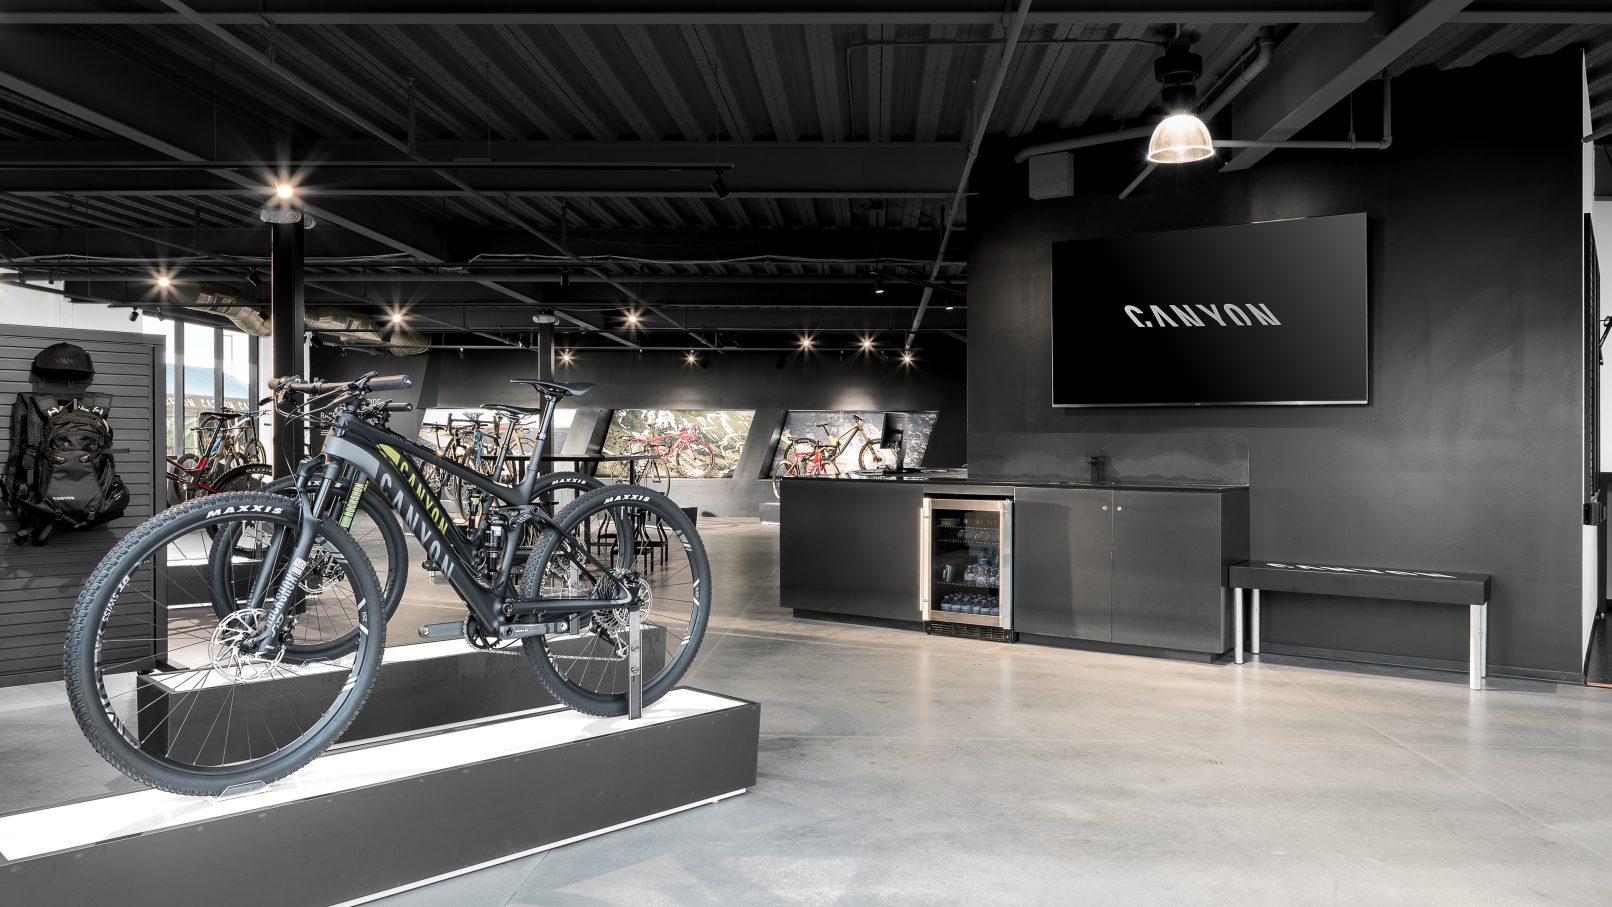 Commercial Building Photography of a Canyon Bicycle Shop in San Diego County California featuring two mountain bikes in the foreground and the checkout counter in the rear of the scene